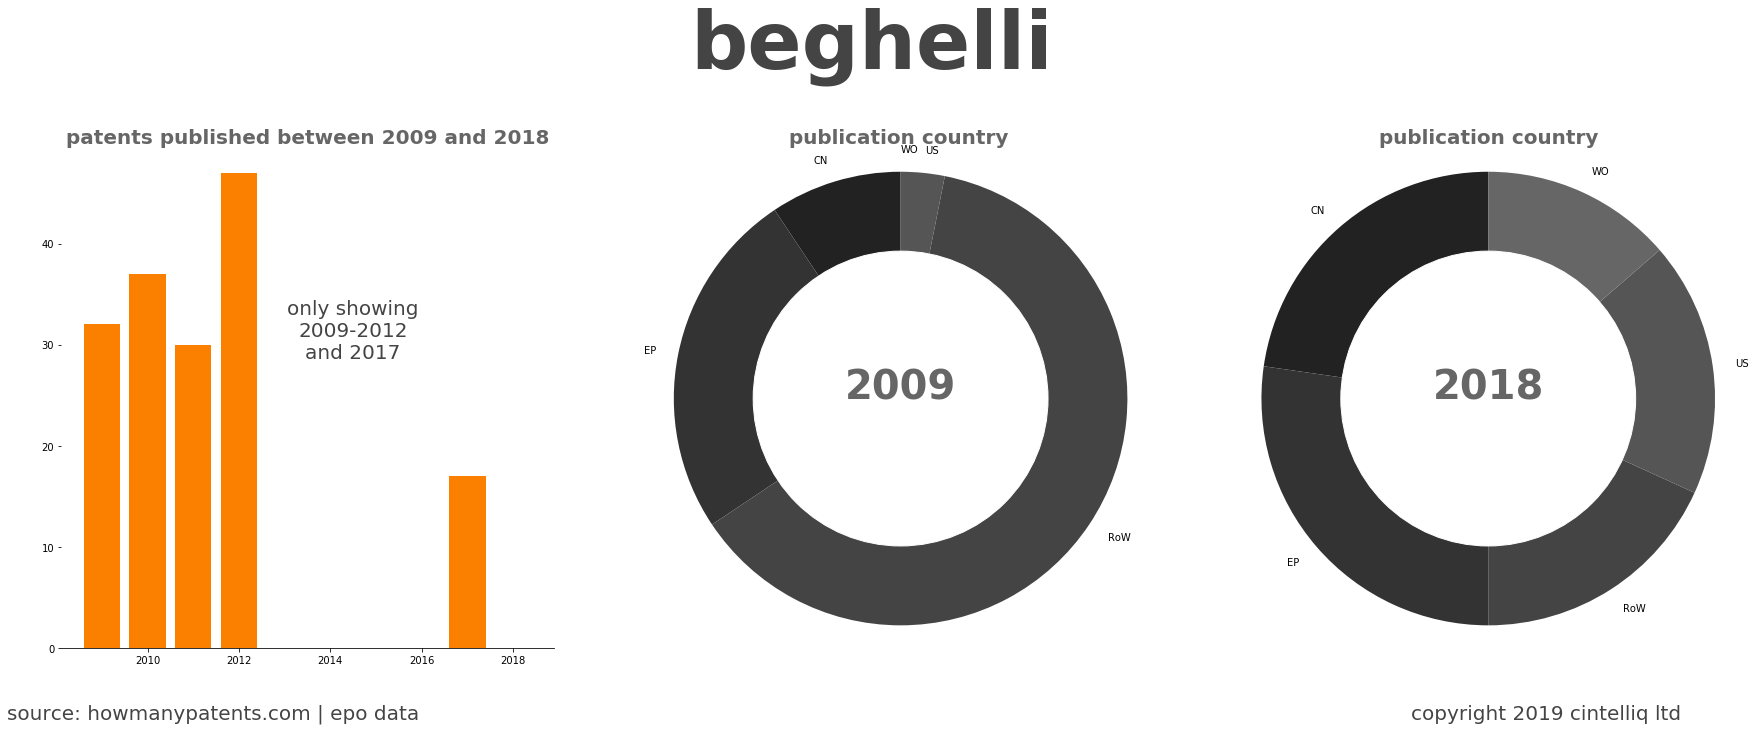 summary of patents for Beghelli